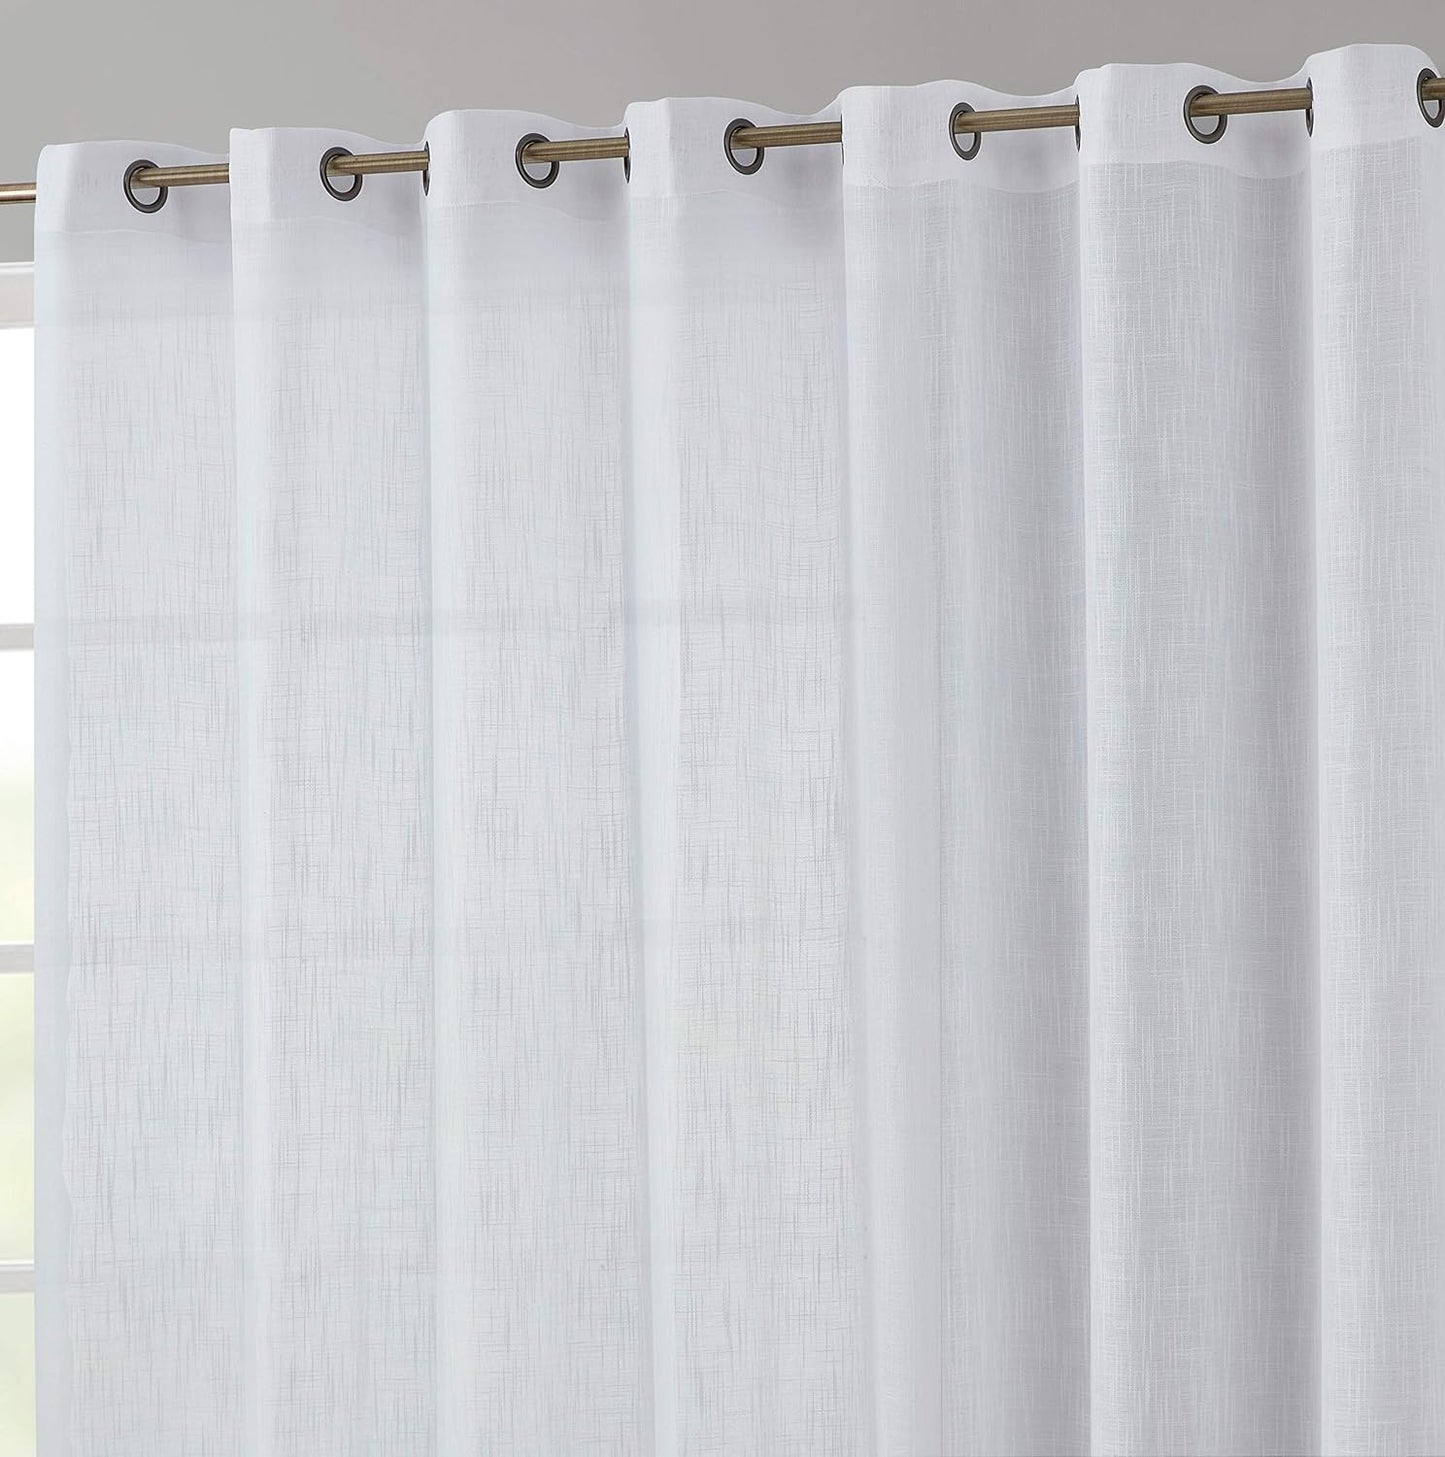 HLC.ME Faux Linen Semi Sheer Extra Wide Light Filtering Patio Door Grommet Curtain Panel for Sliding Glass Doors - White - 100 W X 84 Inch Long  HLC.ME White 100 W X 84 L 